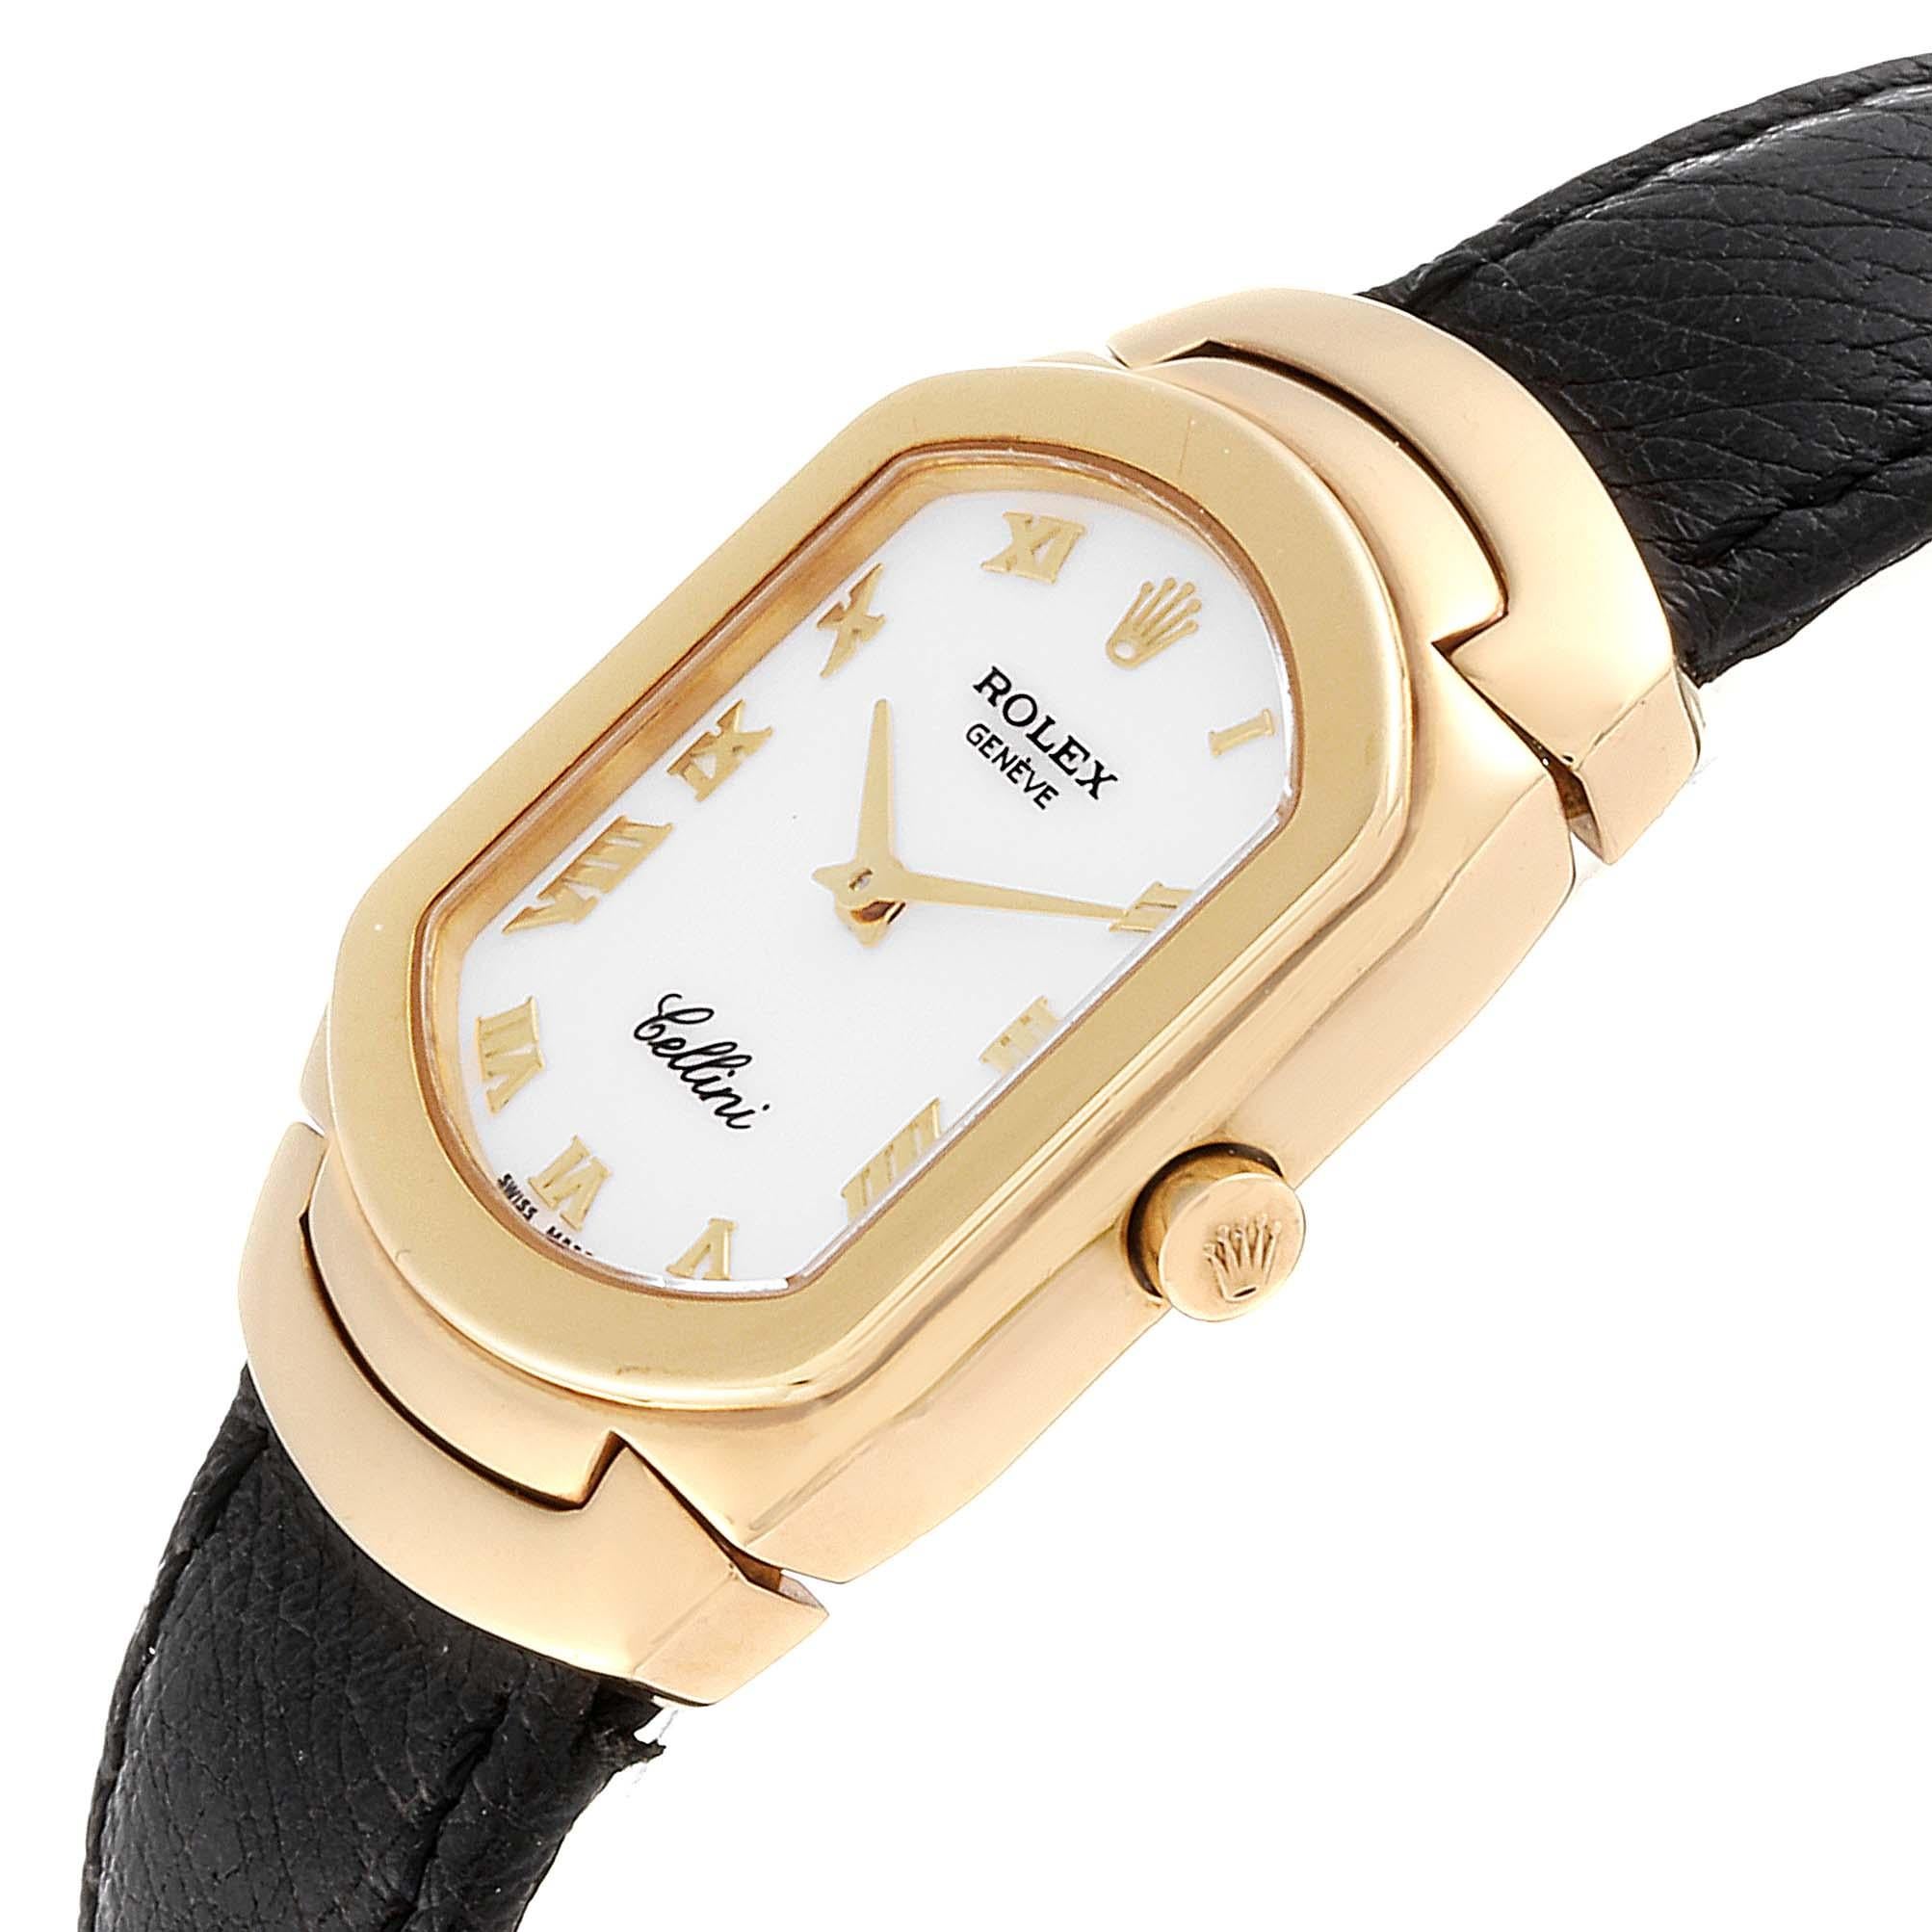 Rolex Cellini Cellissima Yellow Gold White Dial Ladies Watch 6631 For Sale 1